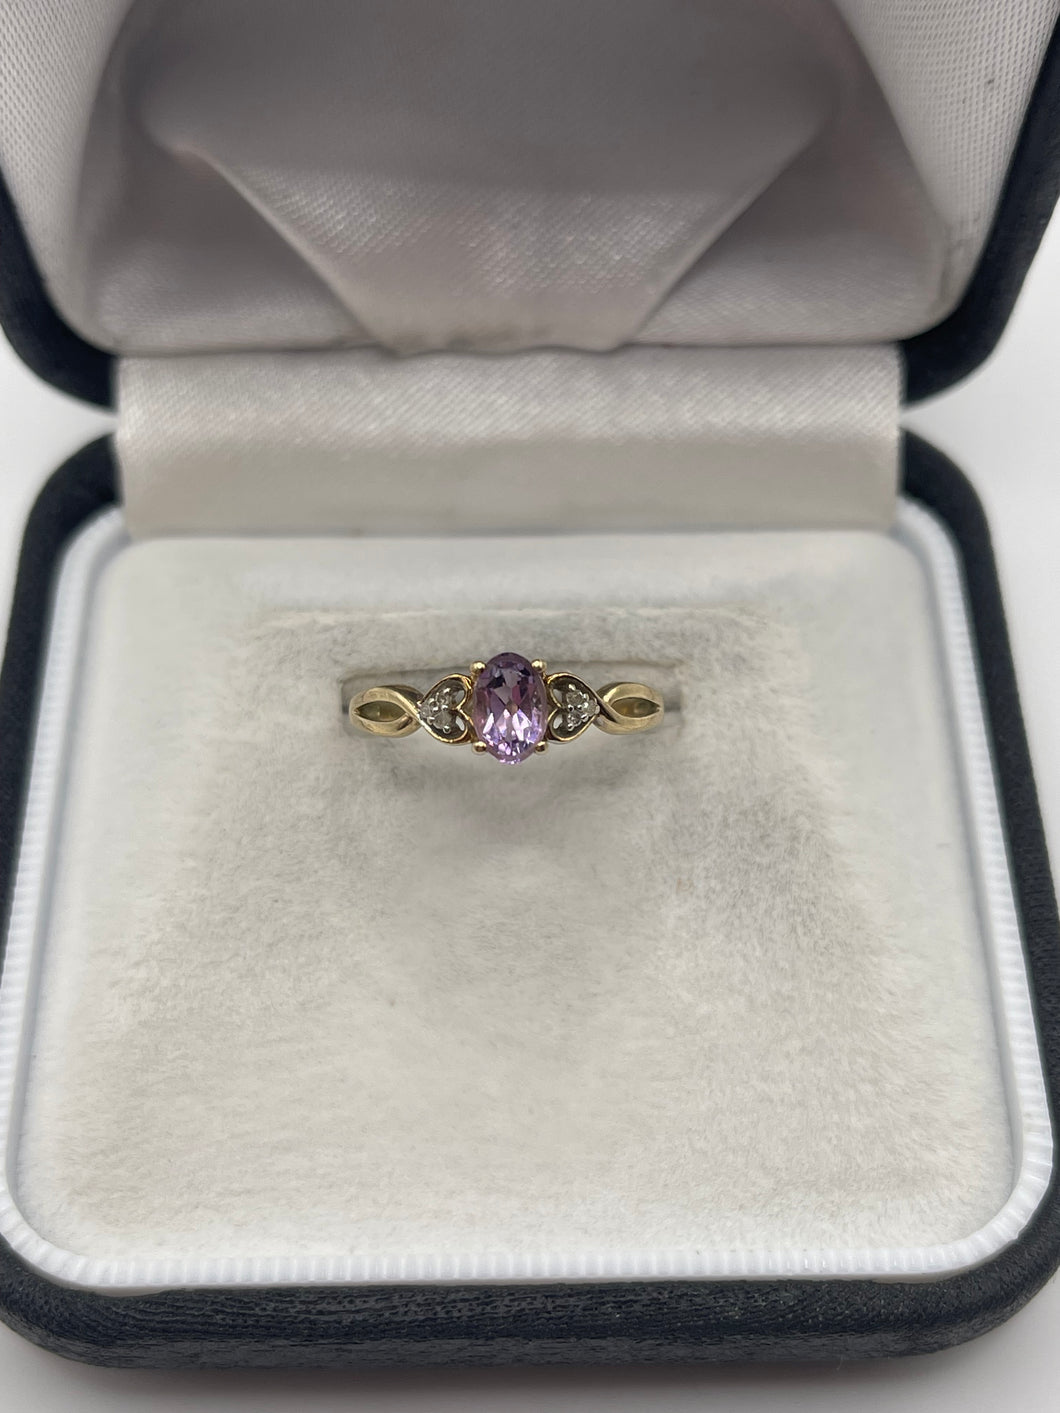 9ct gold amethyst and diamond ring